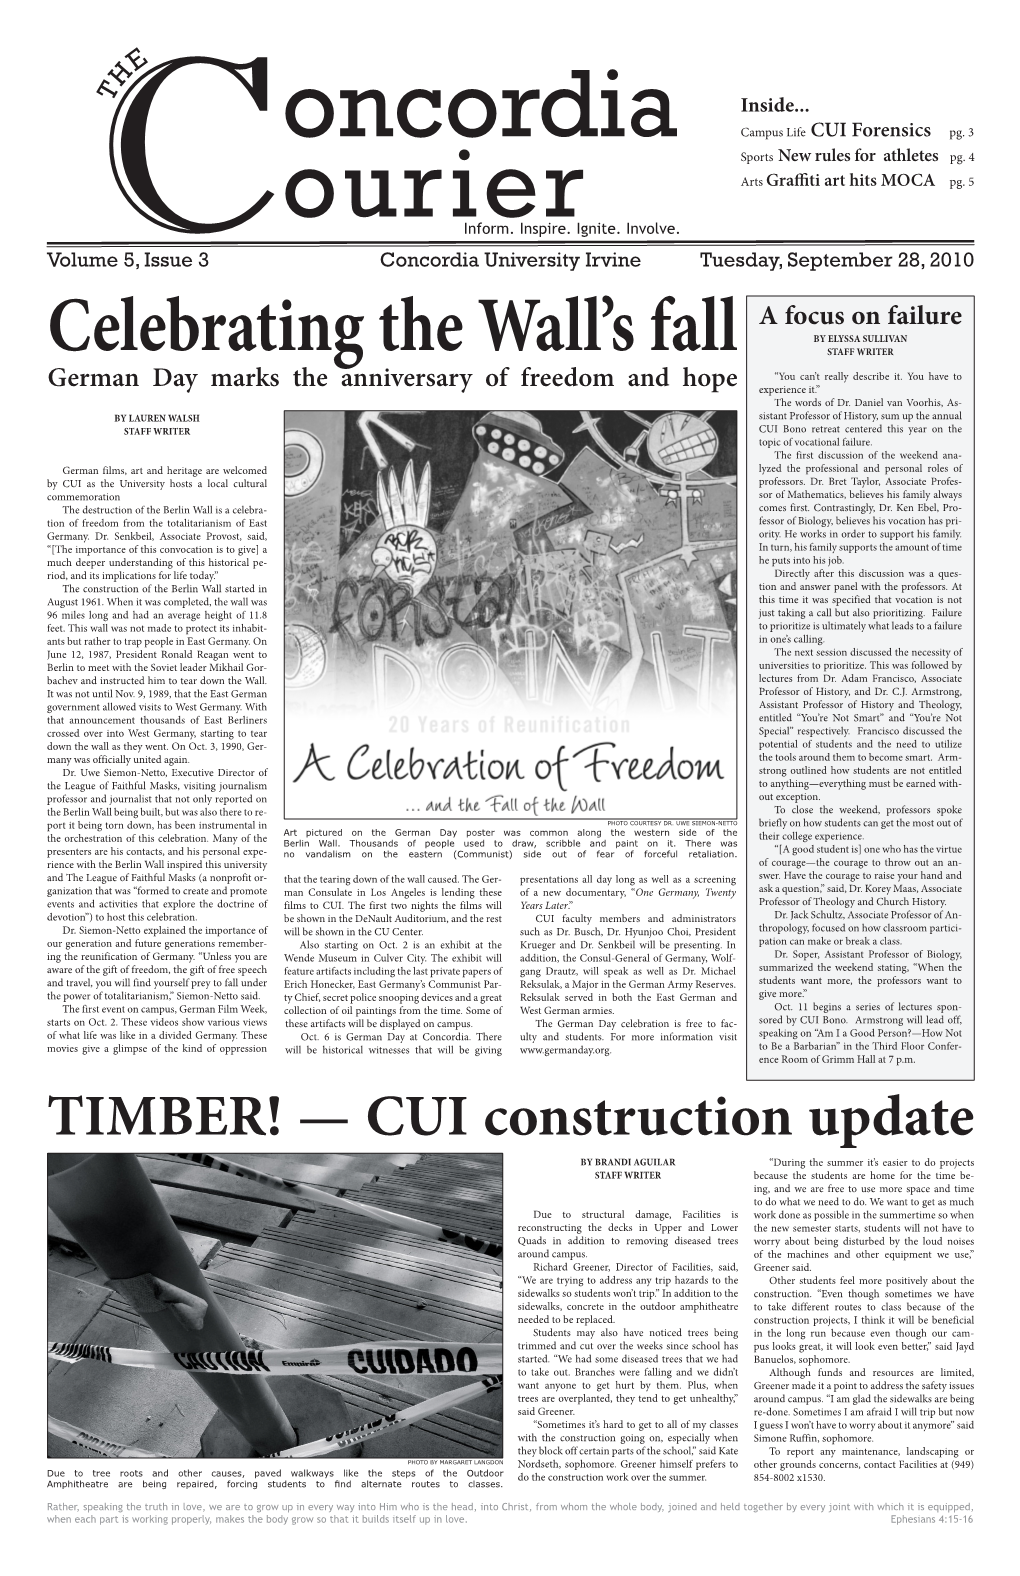 Celebrating the Wall's Fall